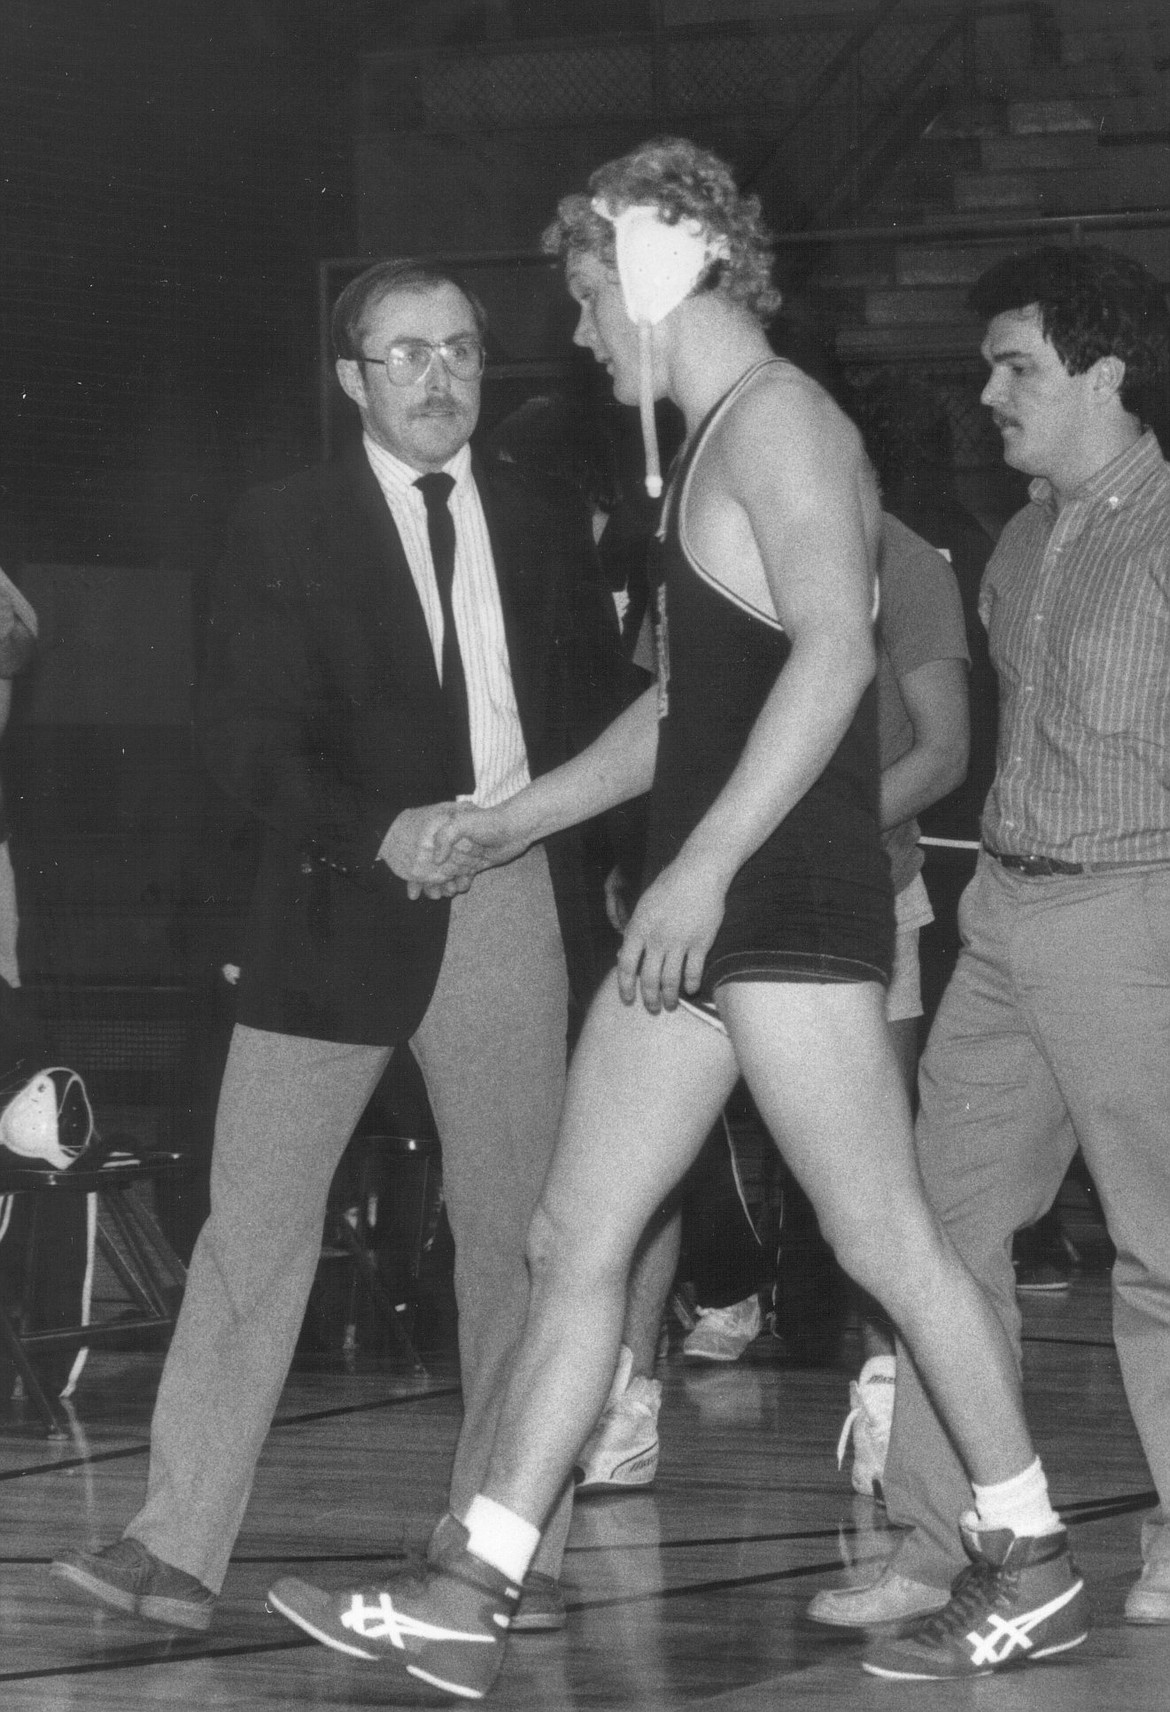 Photo courtesy of NORTH IDAHO COLLEGE
Former North Idaho College wrestling coach John Owen, who won eight NJCAA titles as Cardinal coach, passed away on Thursday.